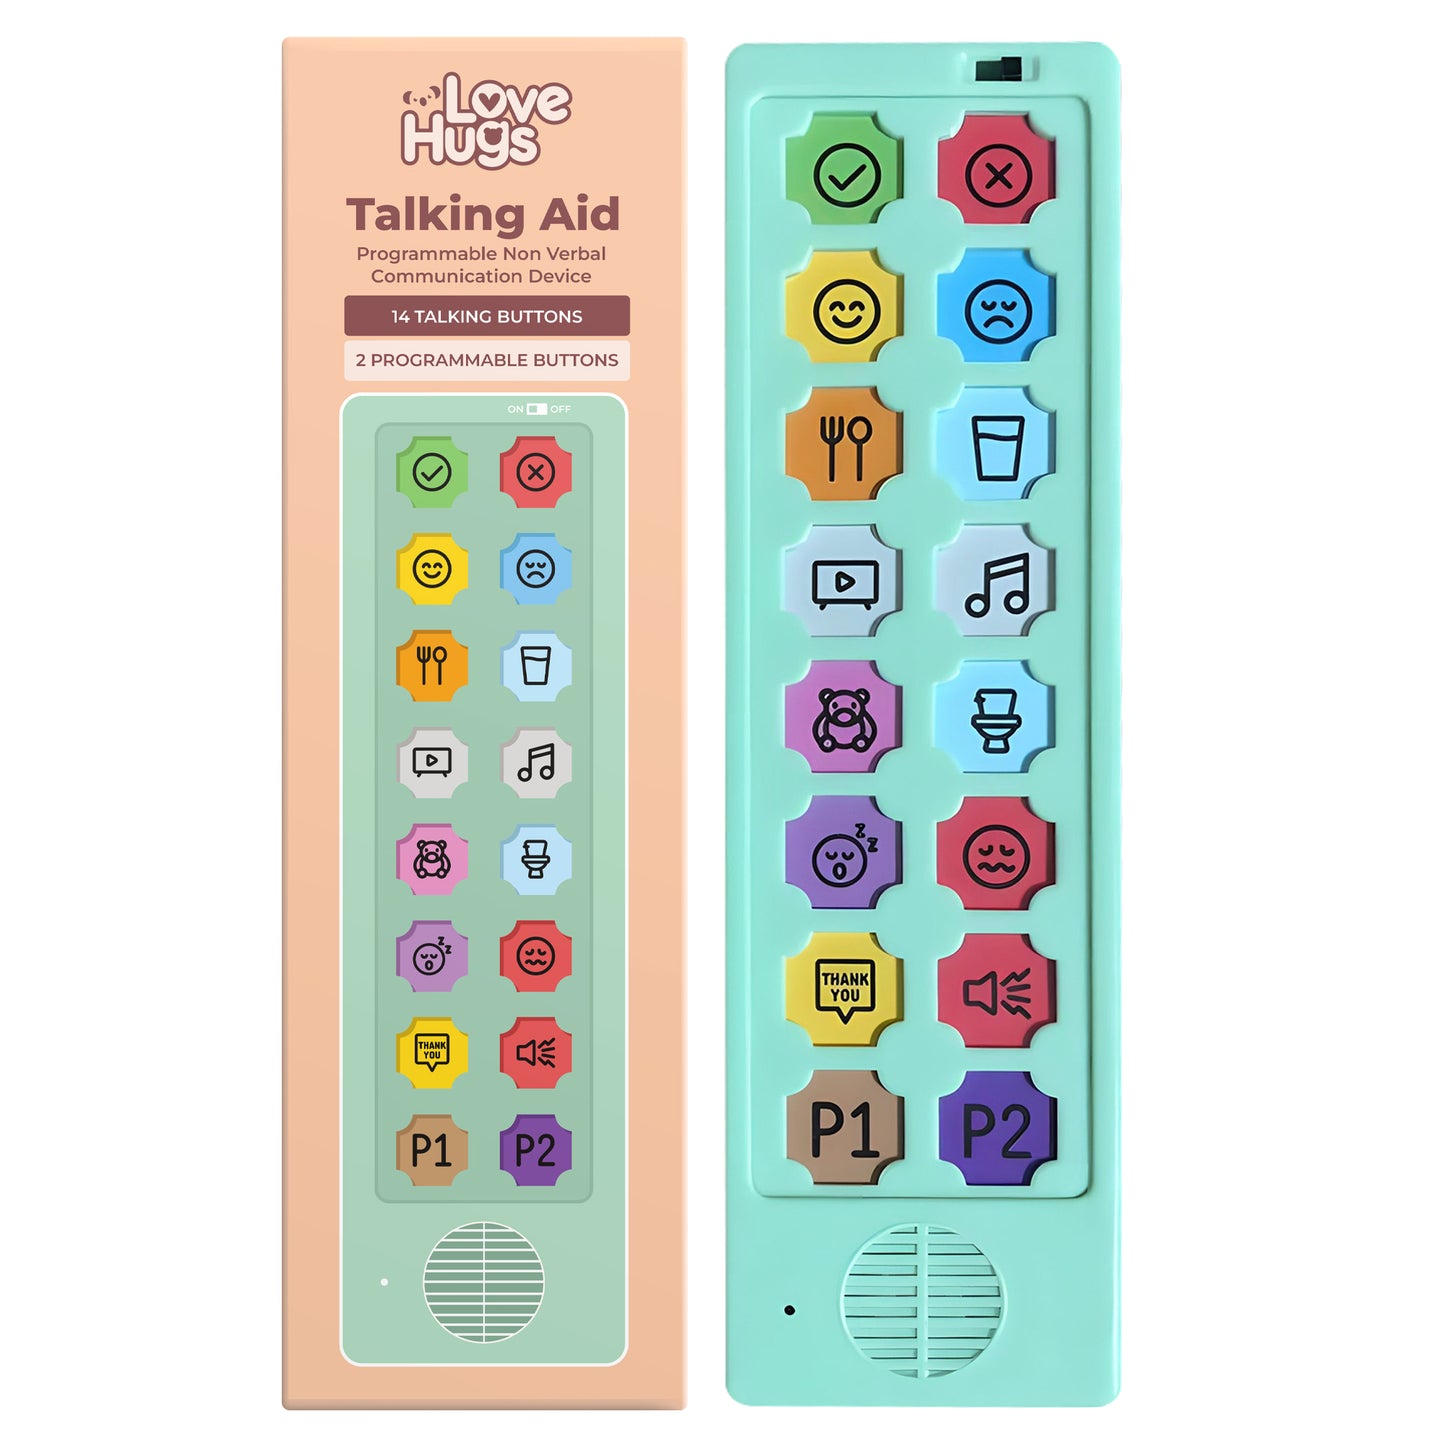 AAC Communication Device For Speech Therapy, Non Verbal Autism & Stroke Rehab